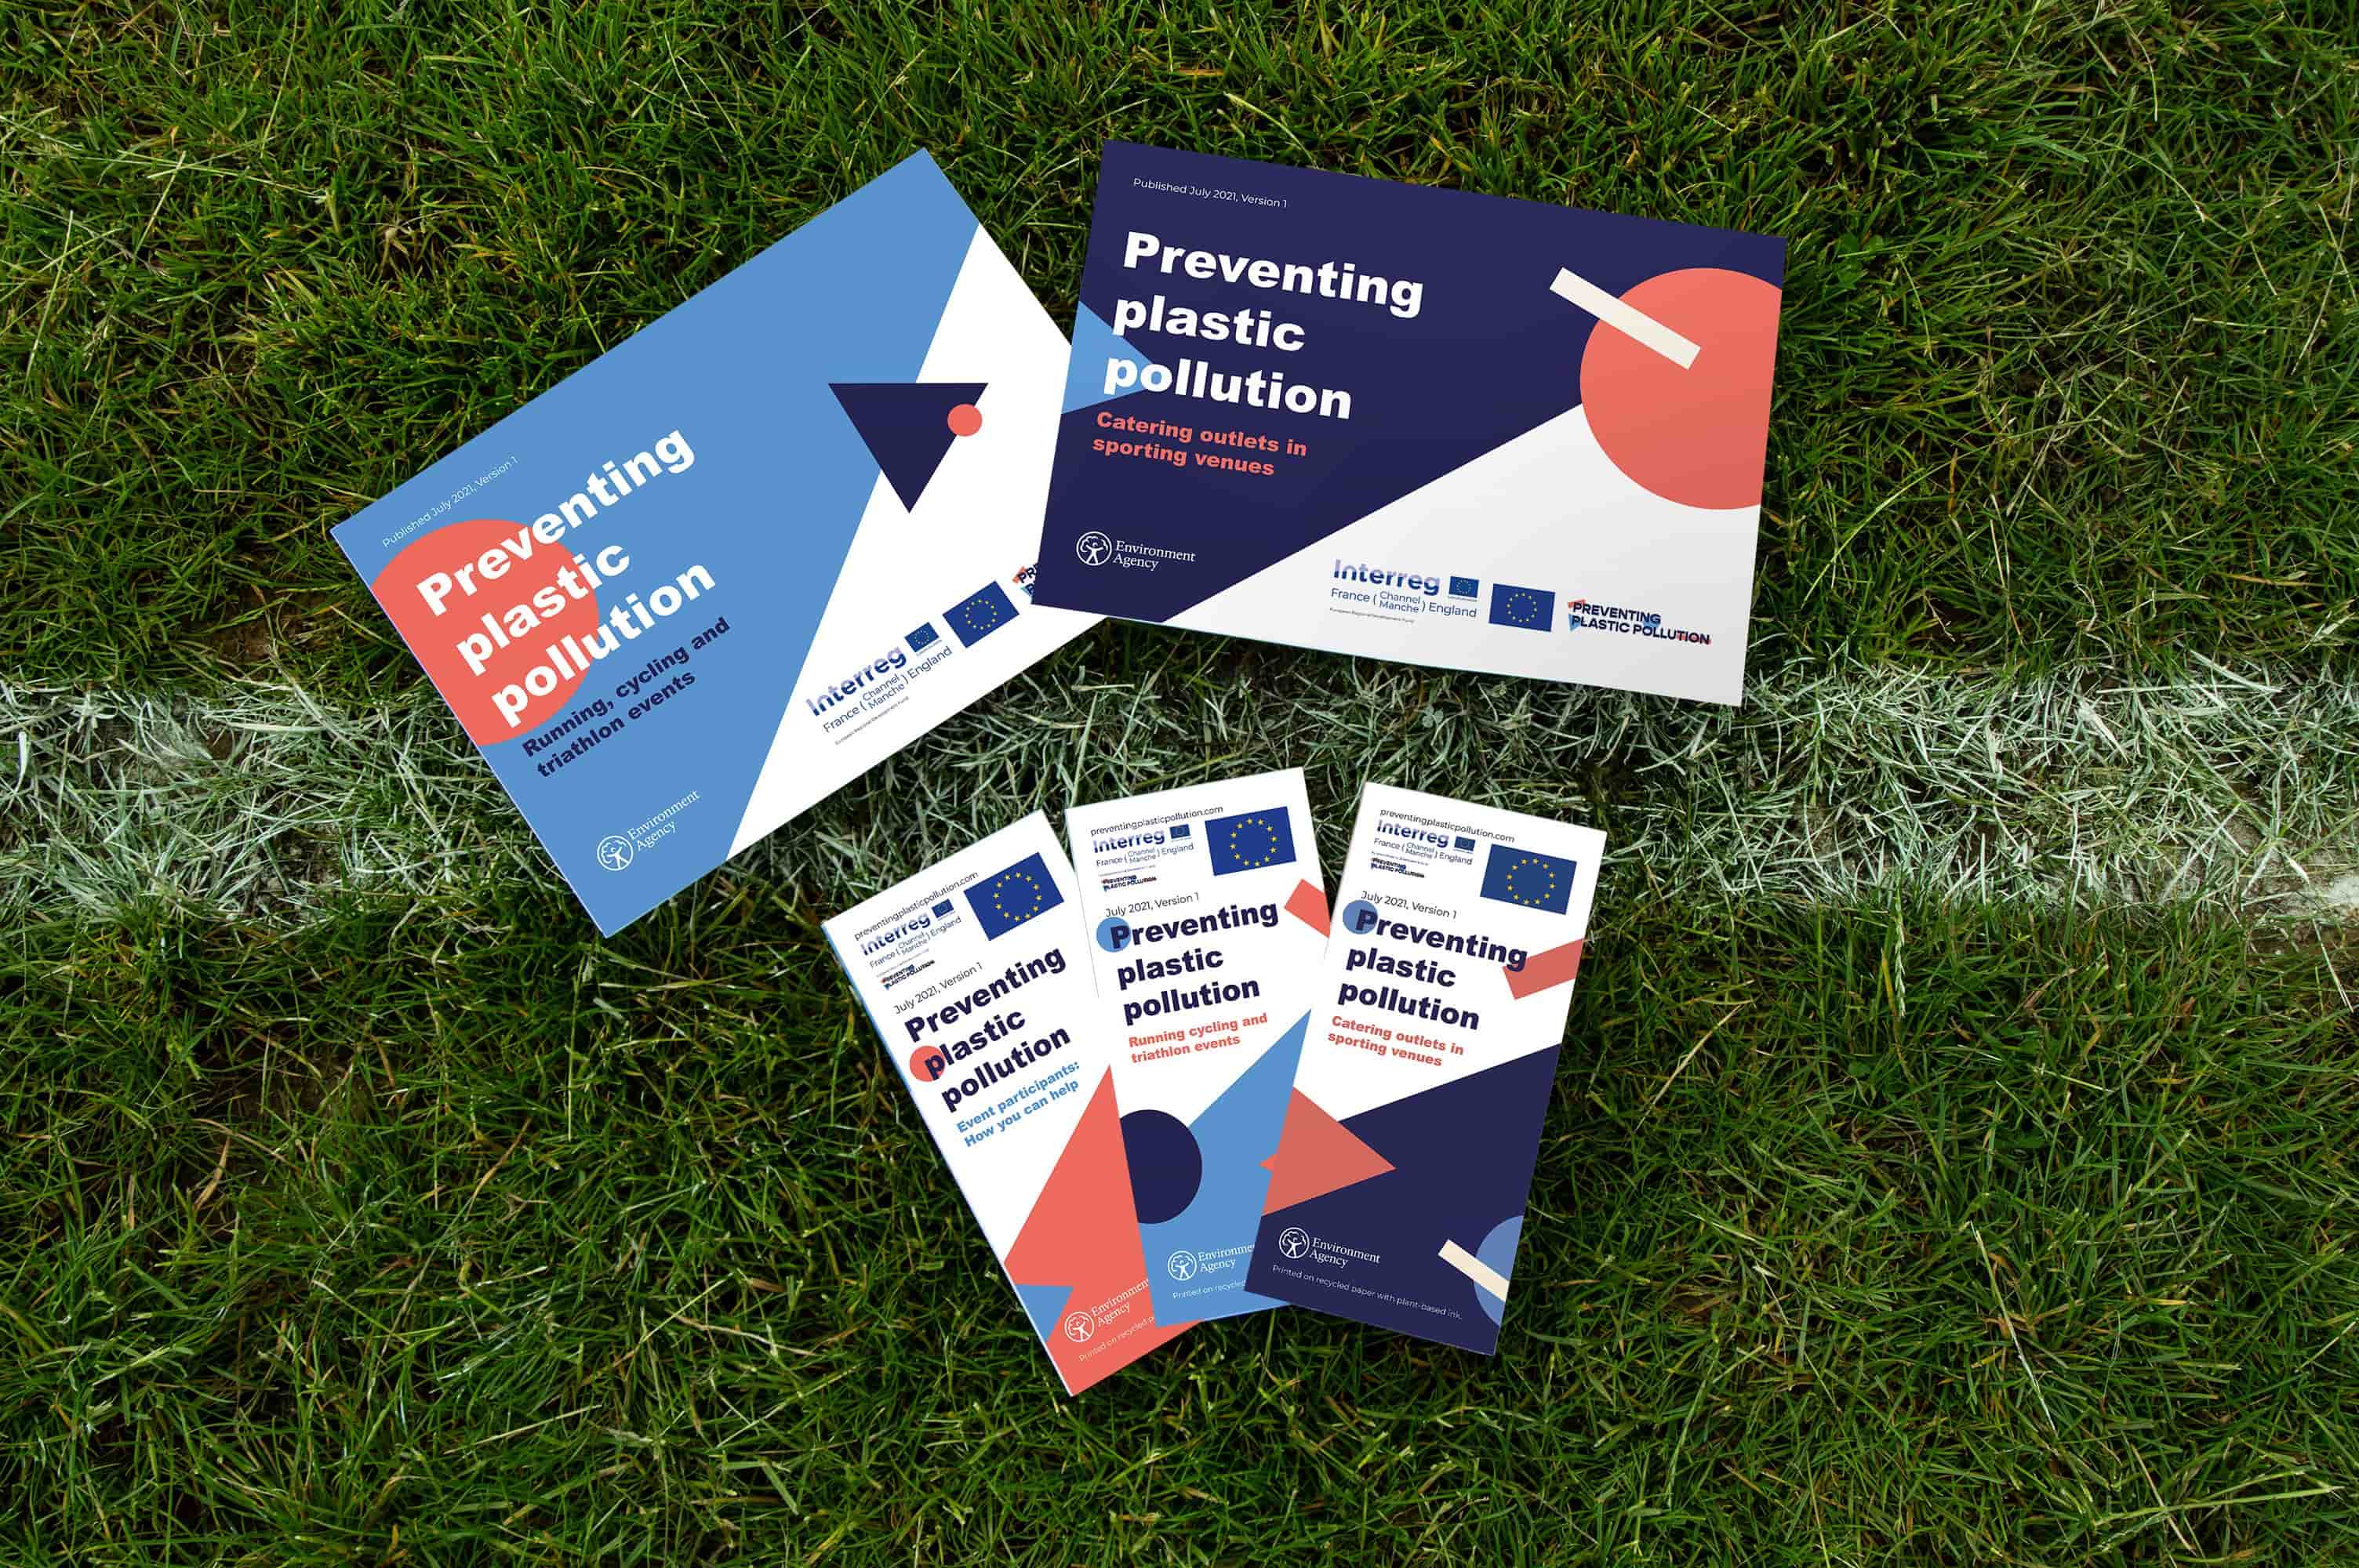 Photo of 5 leaflets on a grass pitch explaining how to get rid of plastic in sport